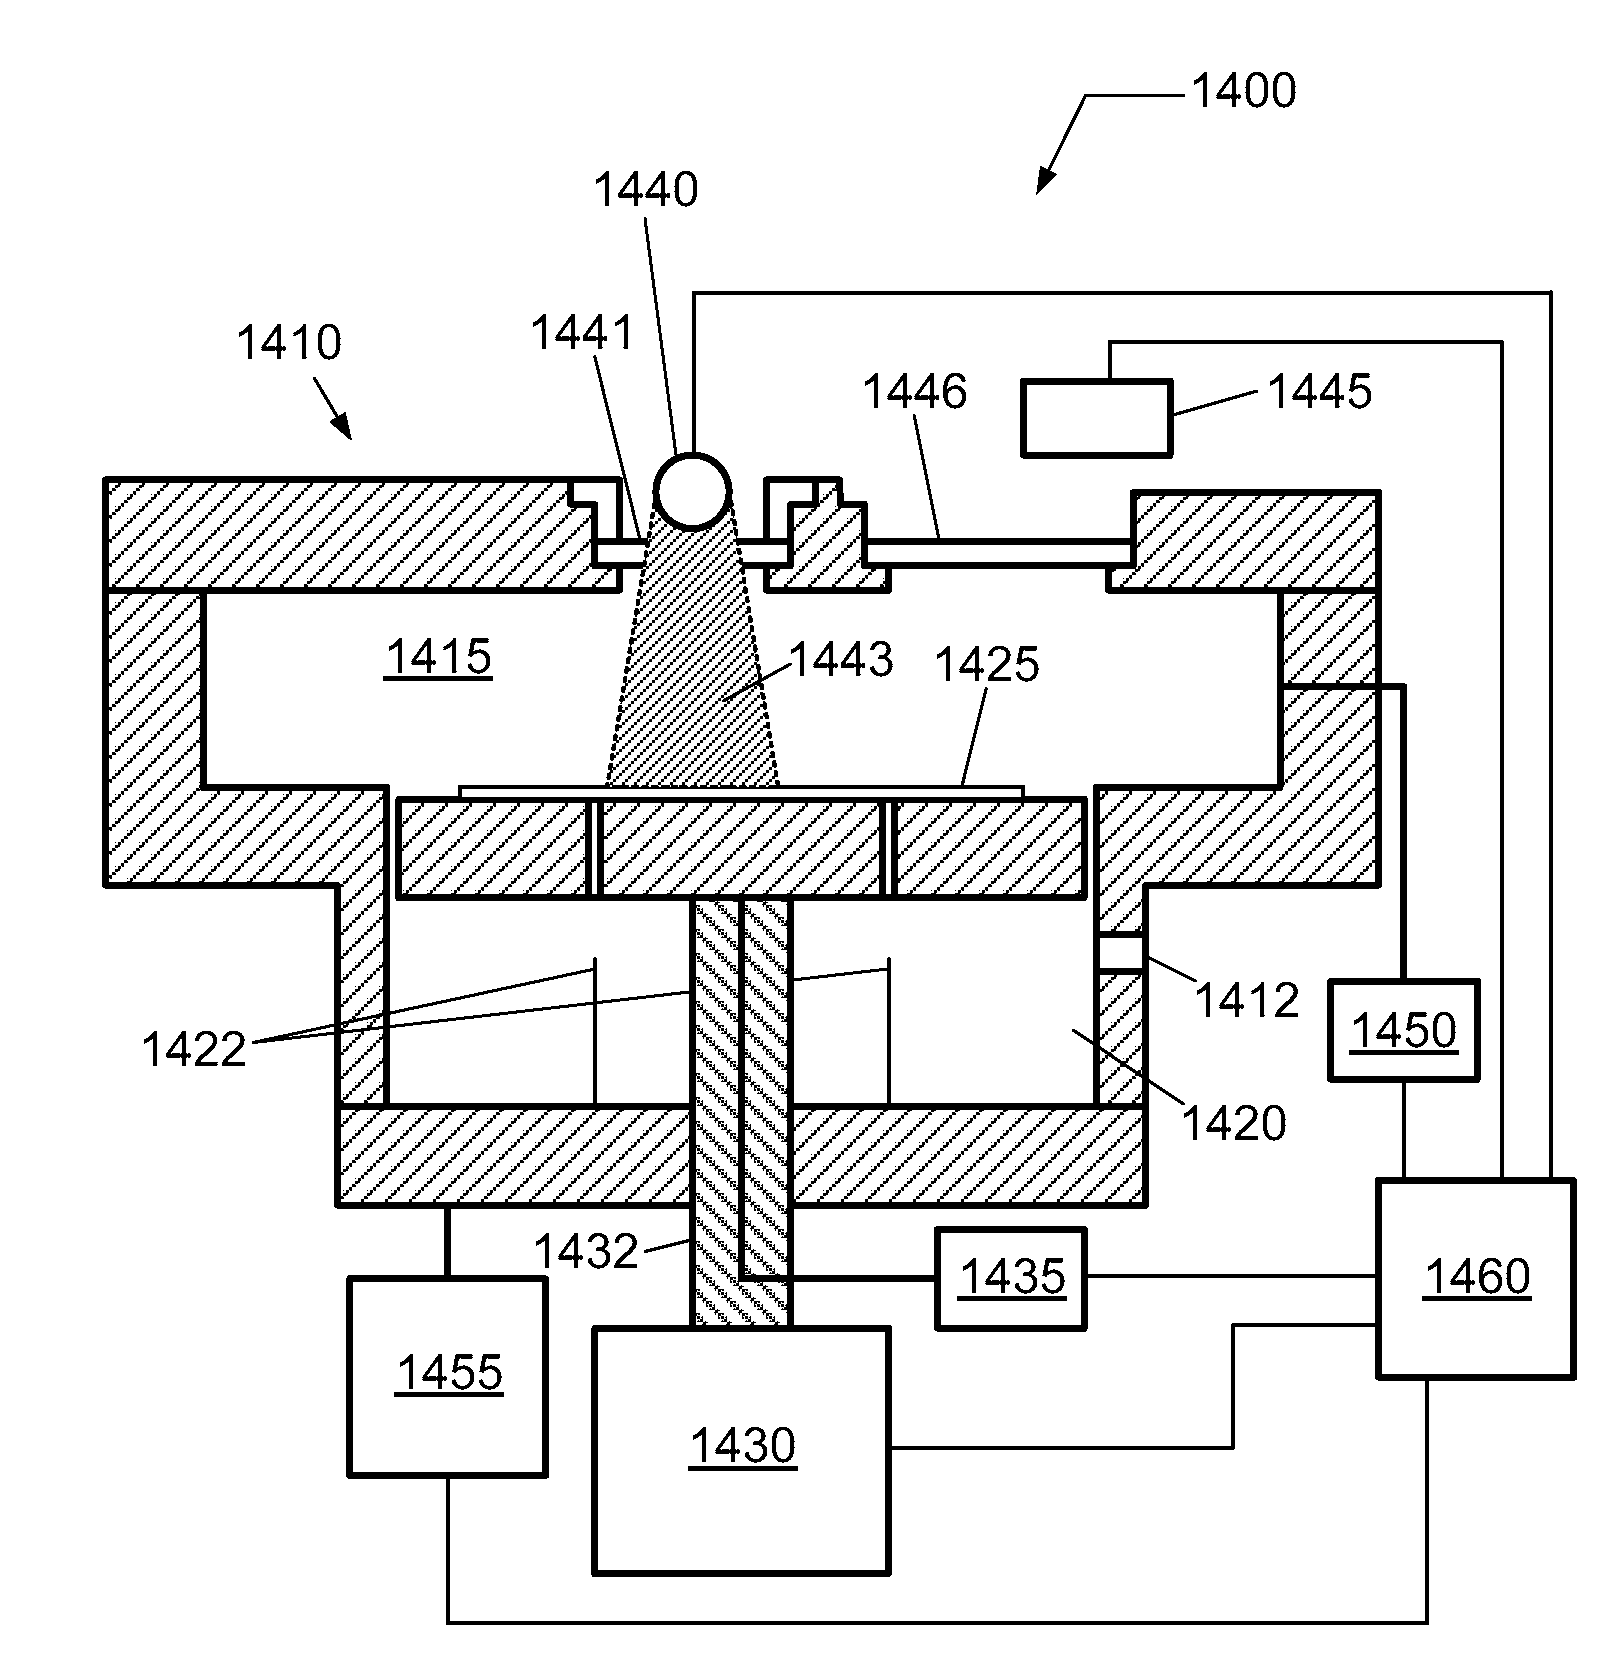 Dielectric material treatment system and method of operating